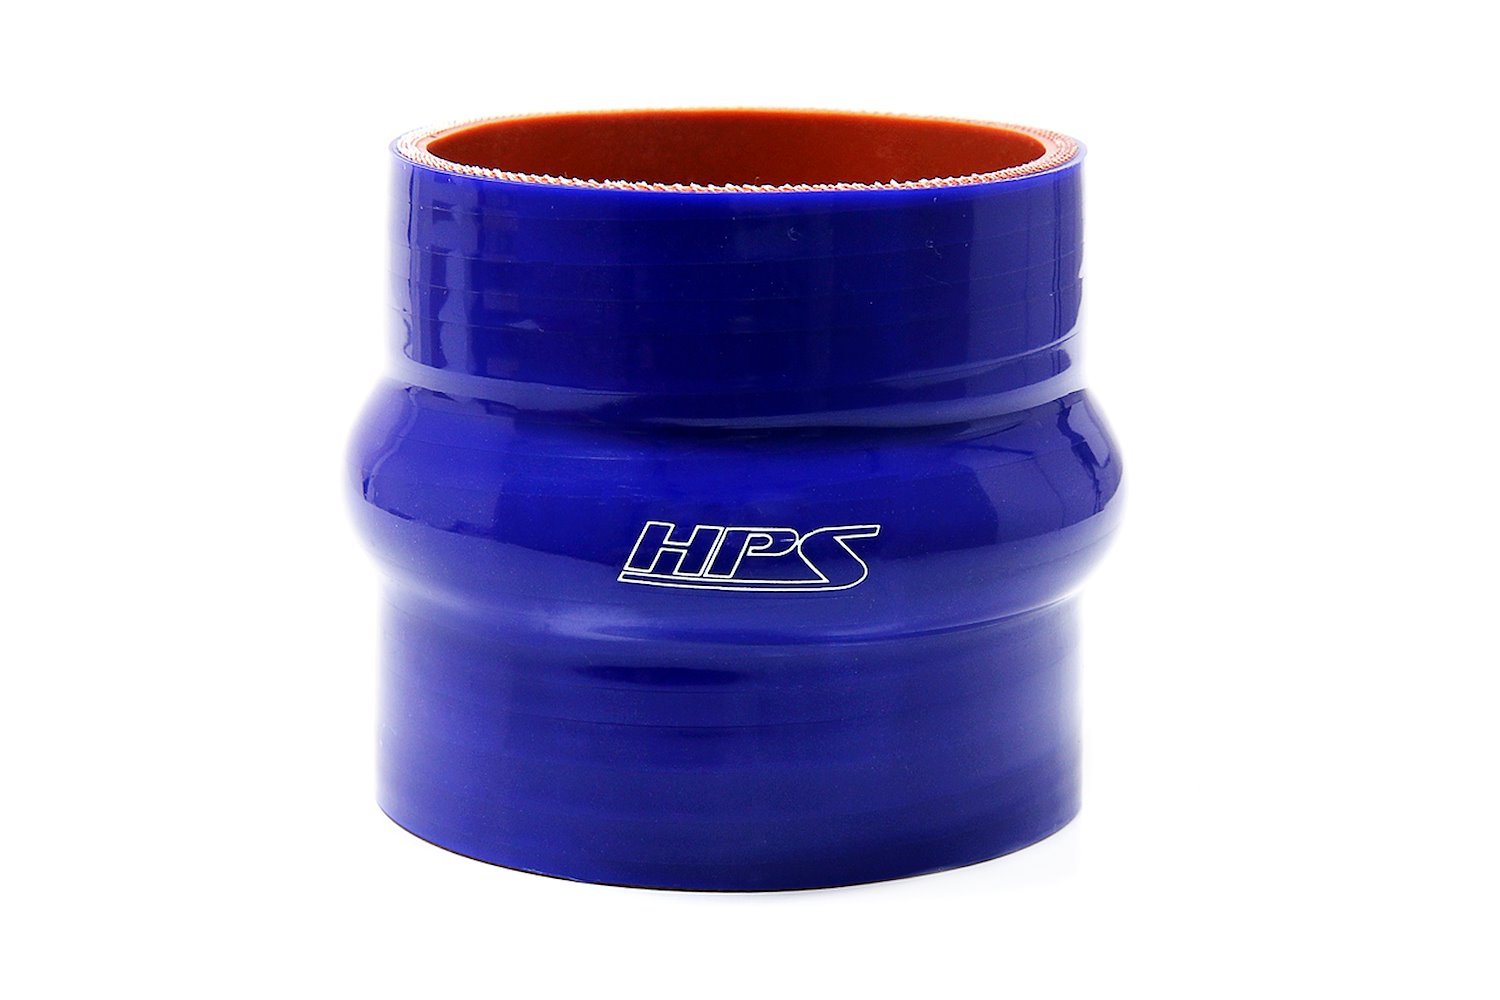 HTSHC-100-BLUE Silicone Hump Coupler Hose, High-Temp 4-Ply Reinforced, 1 in. ID, 3 in. Long, Blue